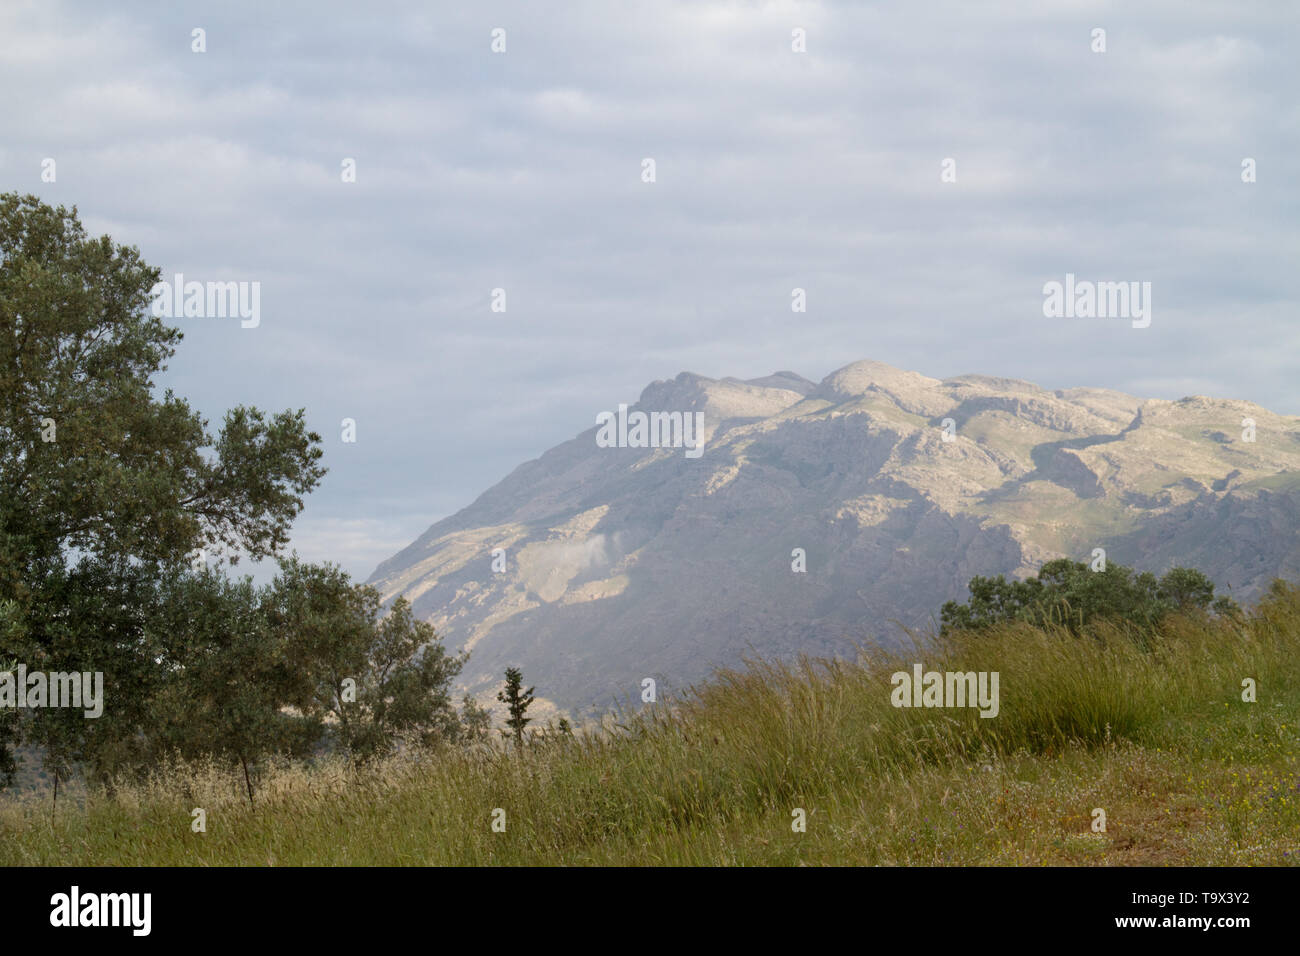 Landscape on Crete, Greece. Morning light shining on Mount Kedros, in the foreground a meadow Stock Photo